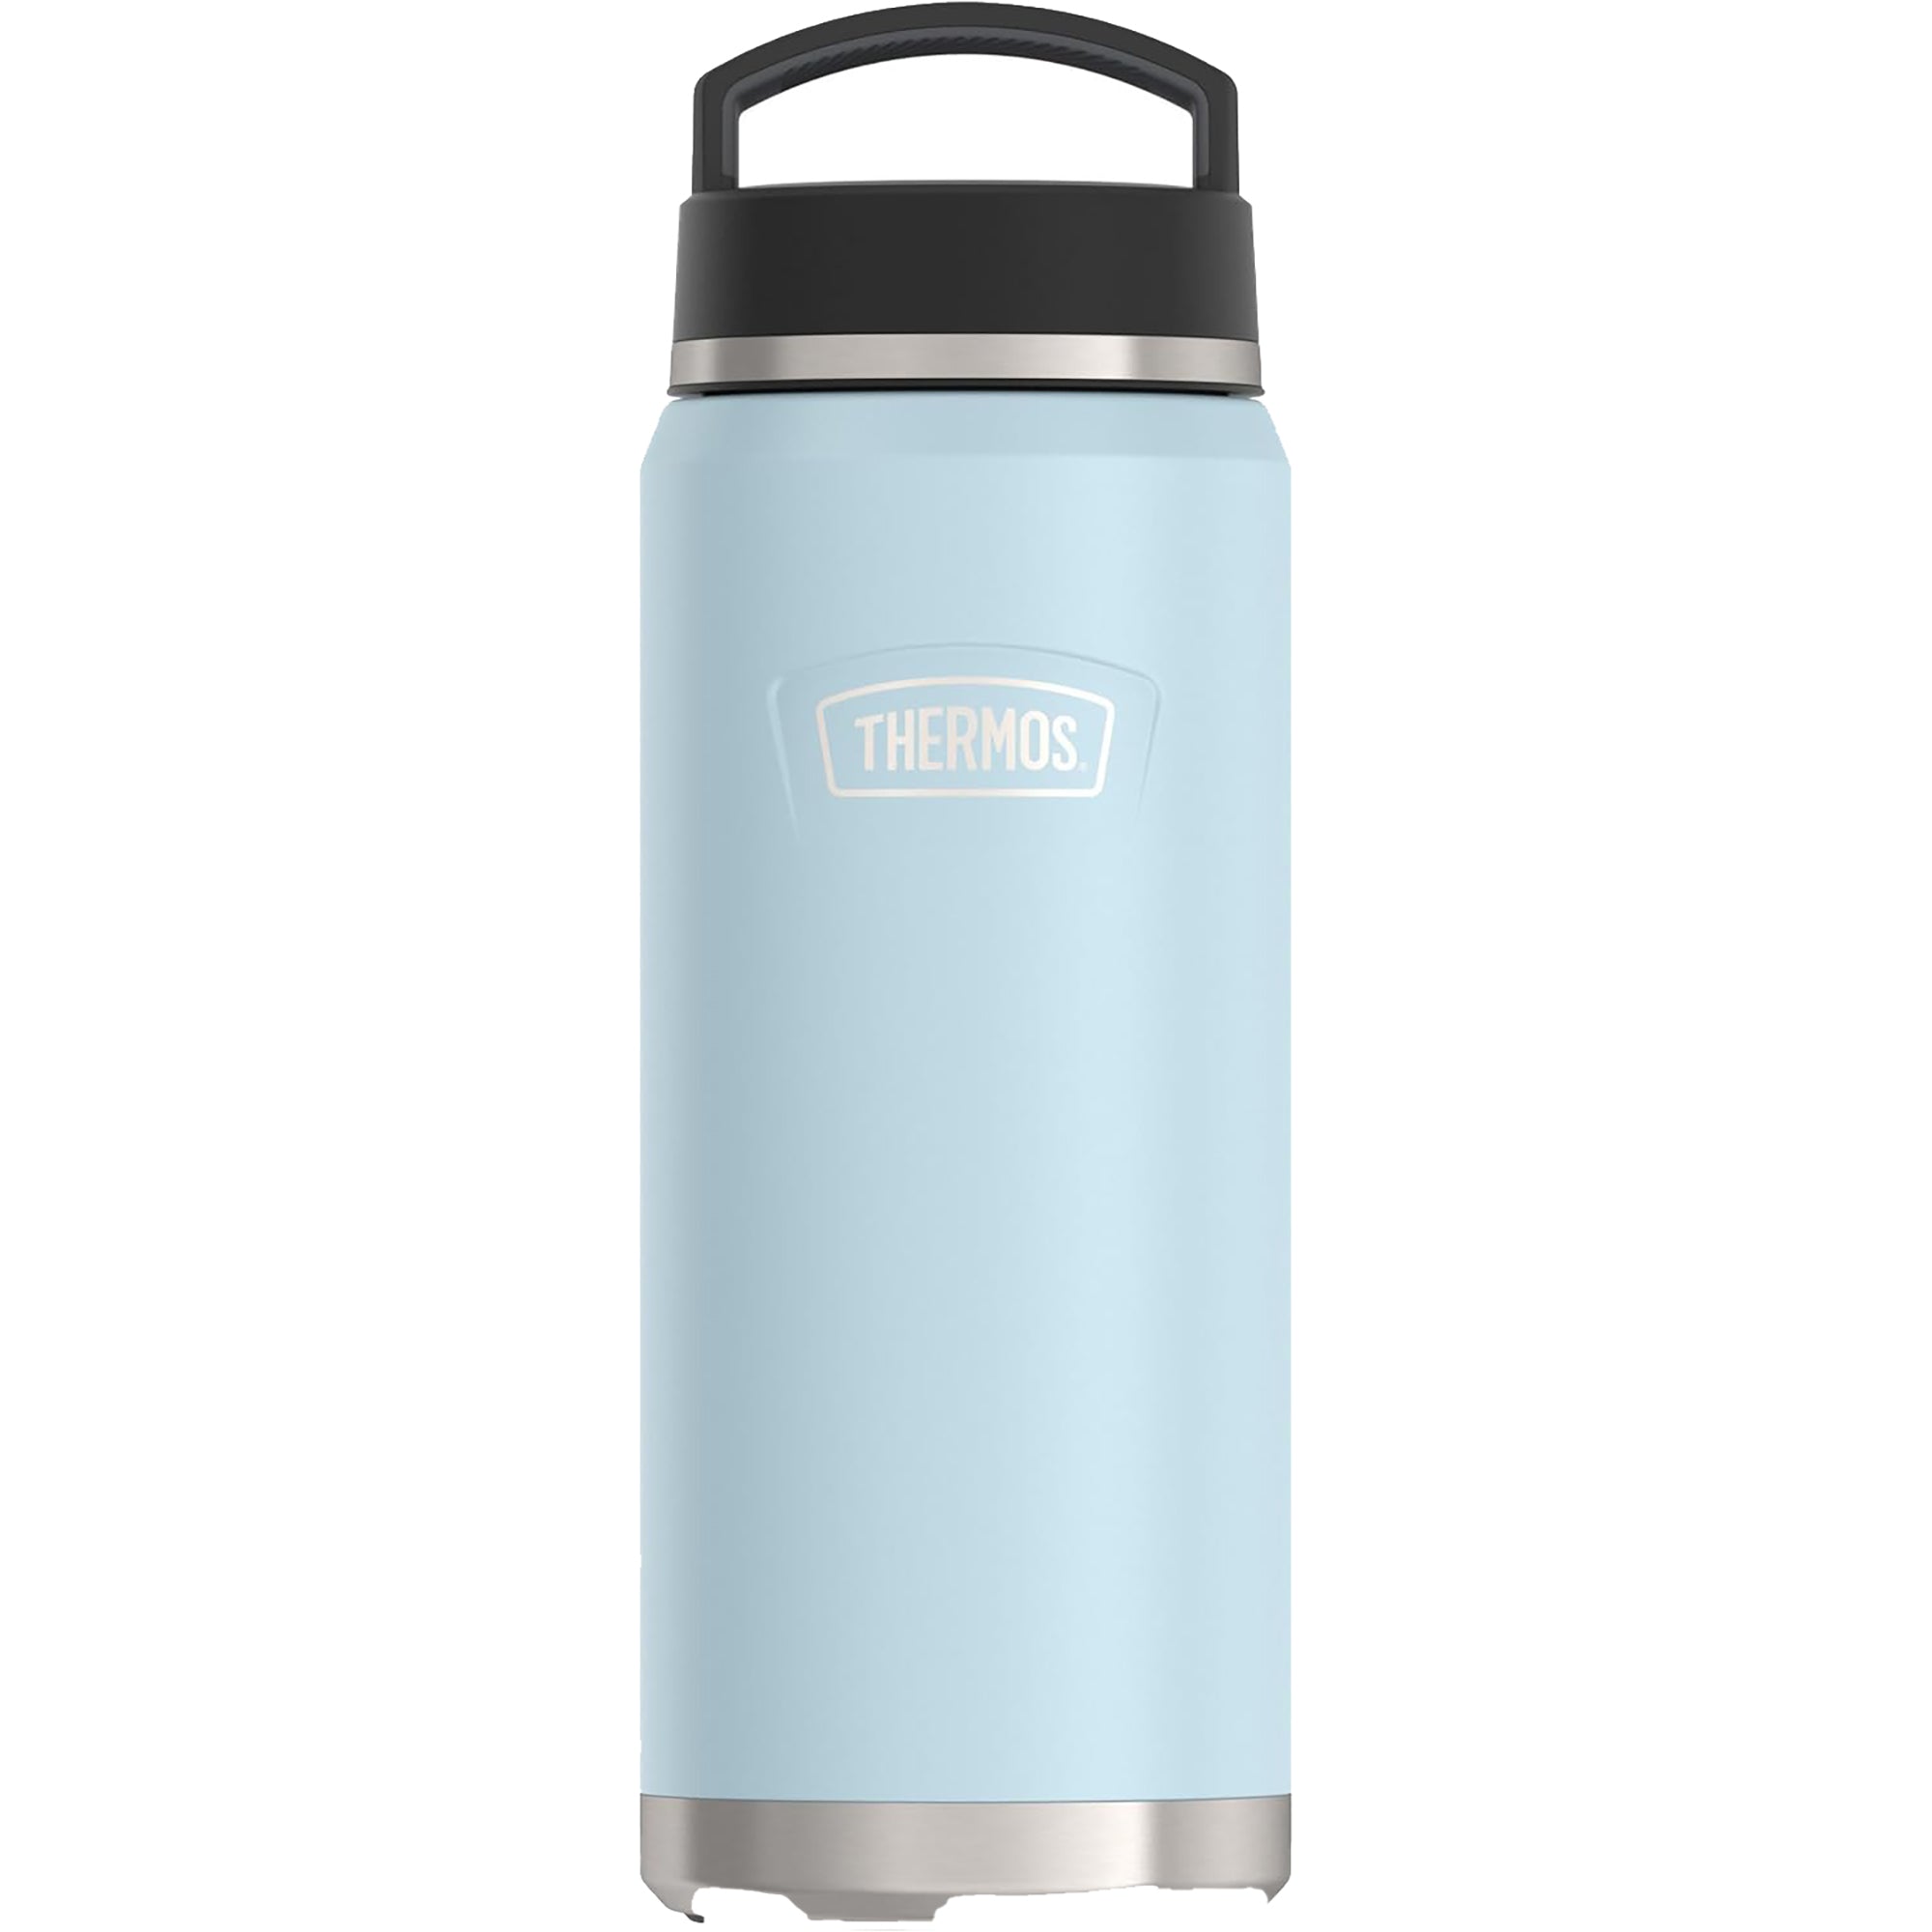 Thermos 40 oz. Icon Insulated Stainless Steel Screw Top Water Bottle Thermos